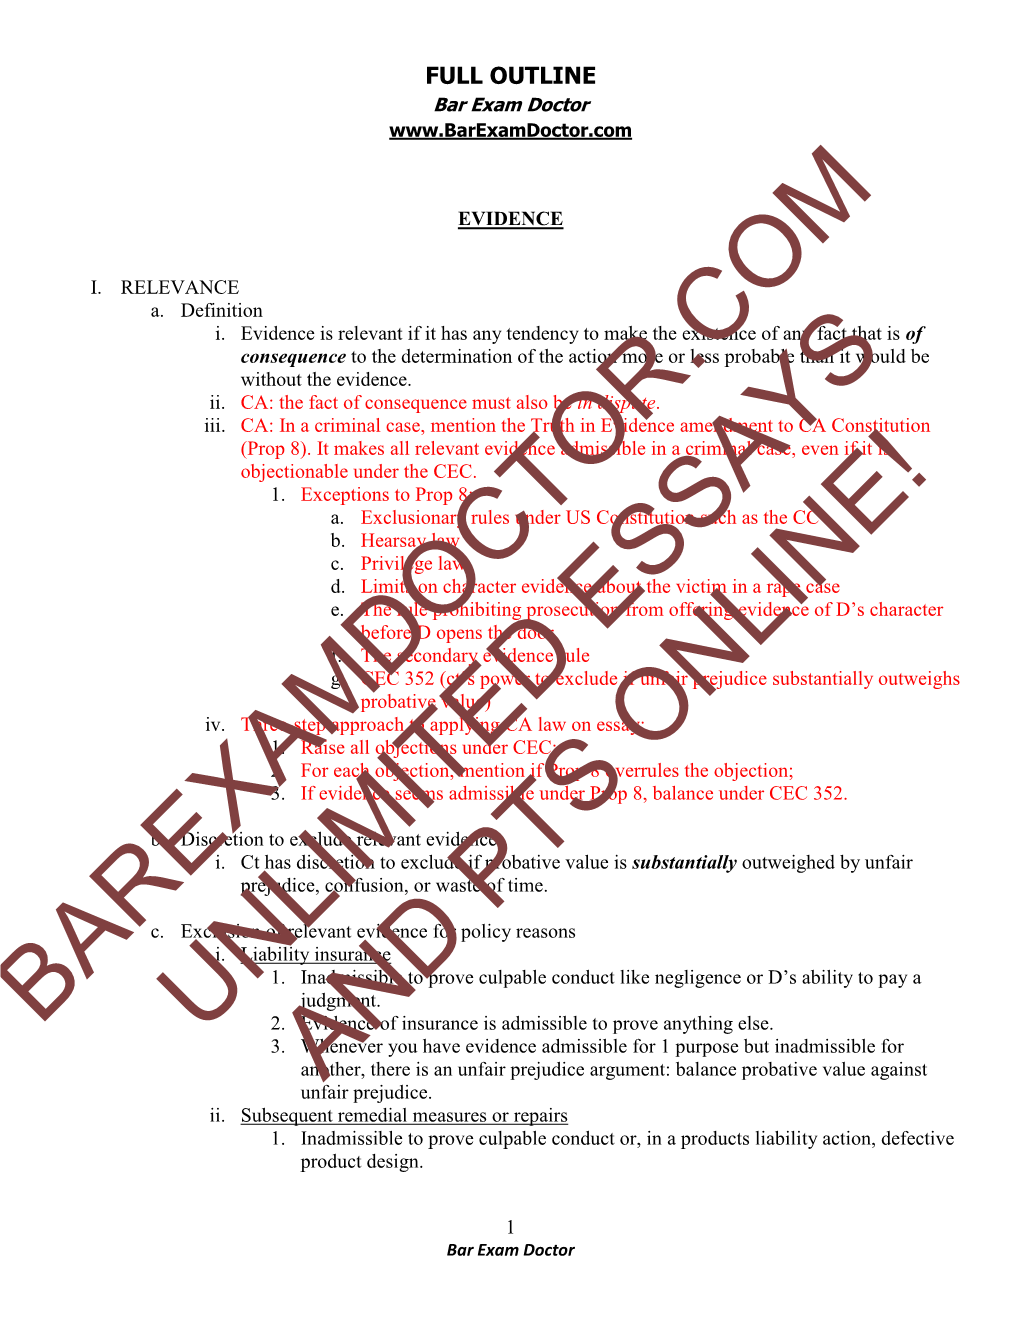 Barexamdoctor.Com Unlimited Essays and Pts Online!